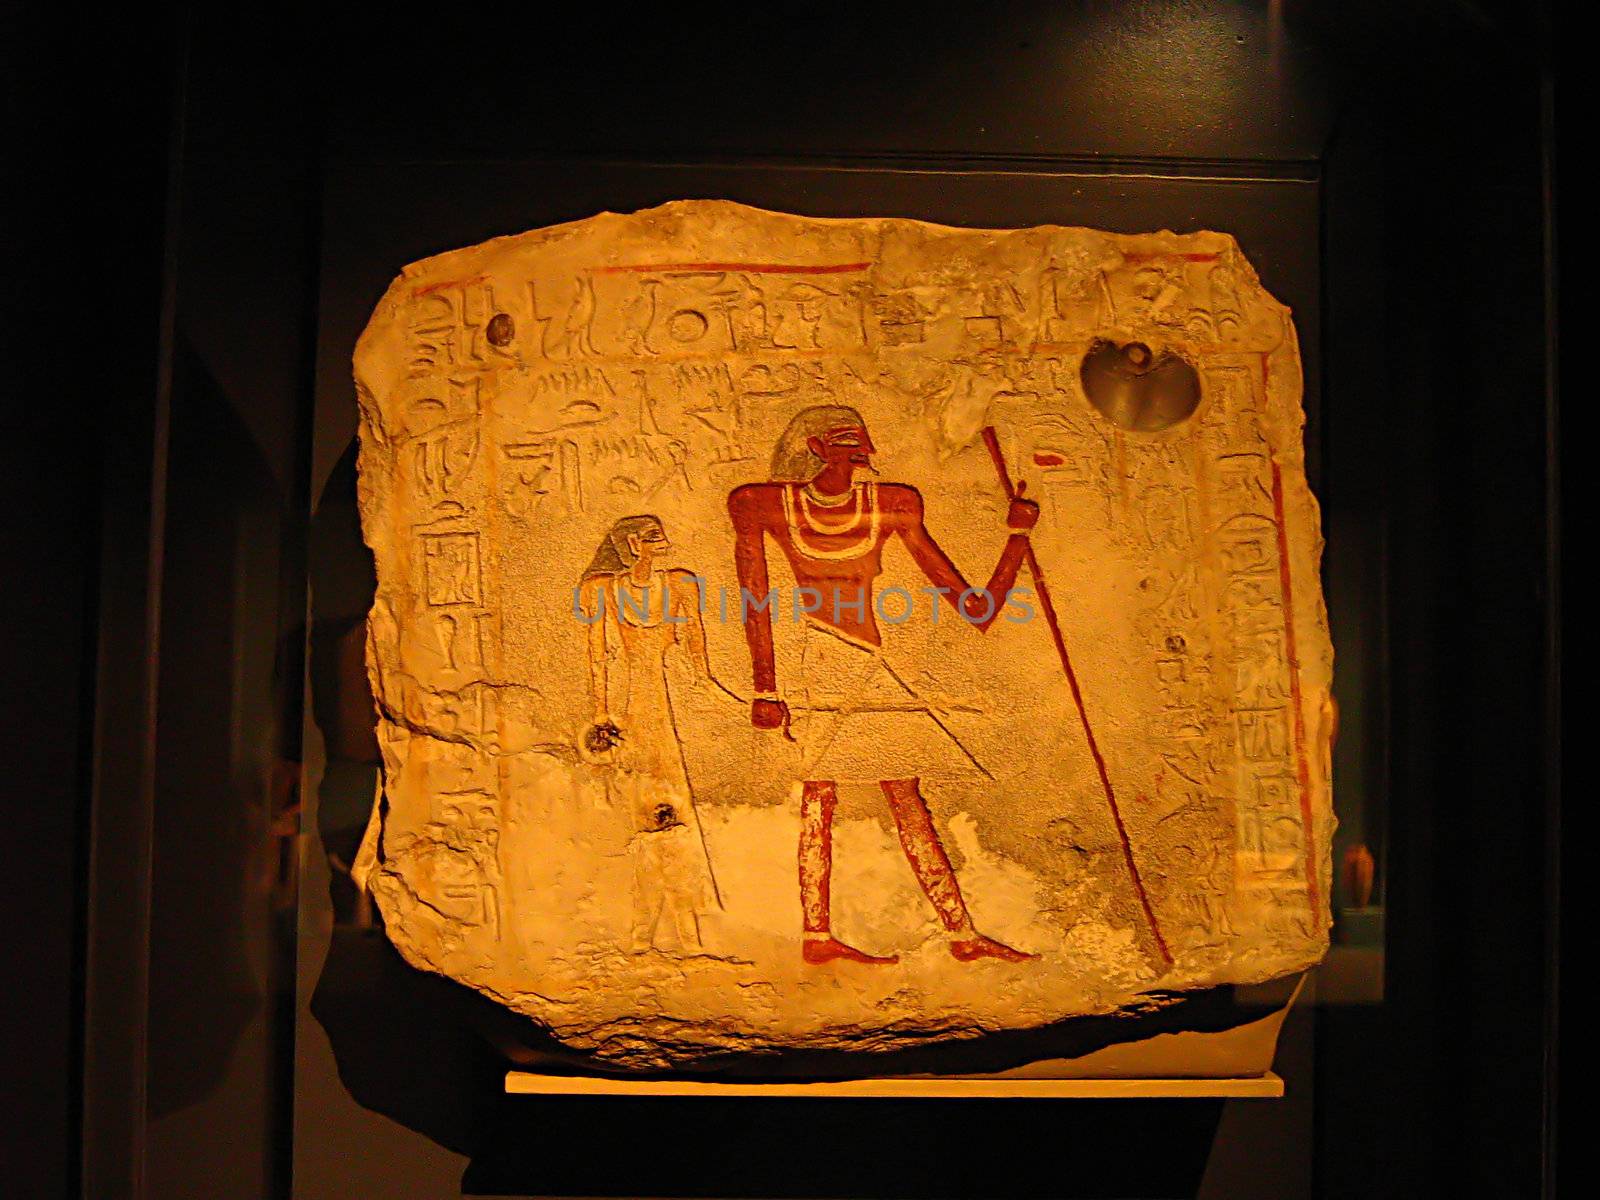 A photograph of an ancient Egyptian relic.